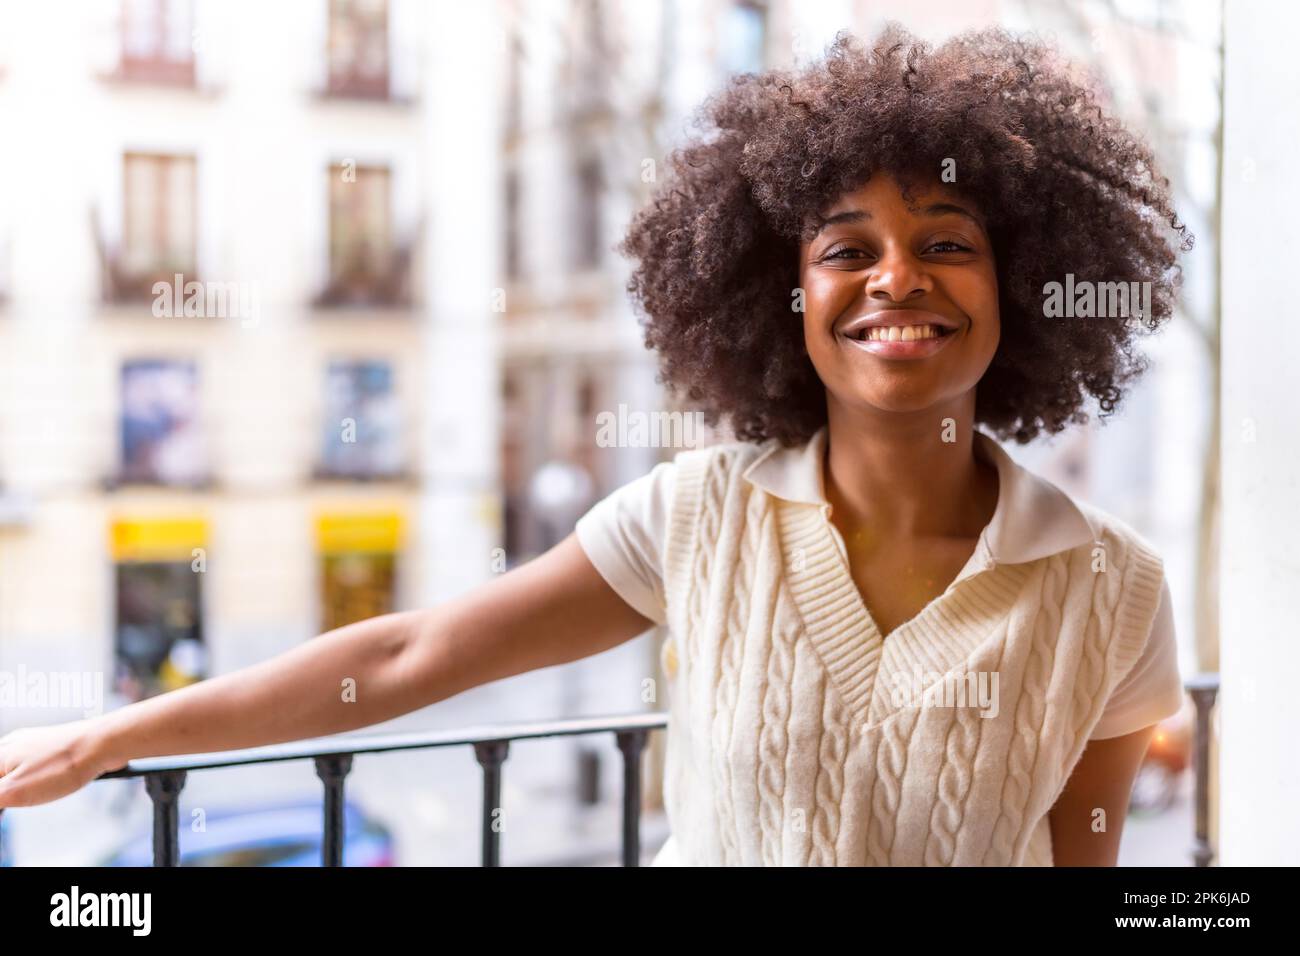 Portrait of a young black ethnic woman with afro hair on a balcony at home smiling, everyday situation, apartment Stock Photo